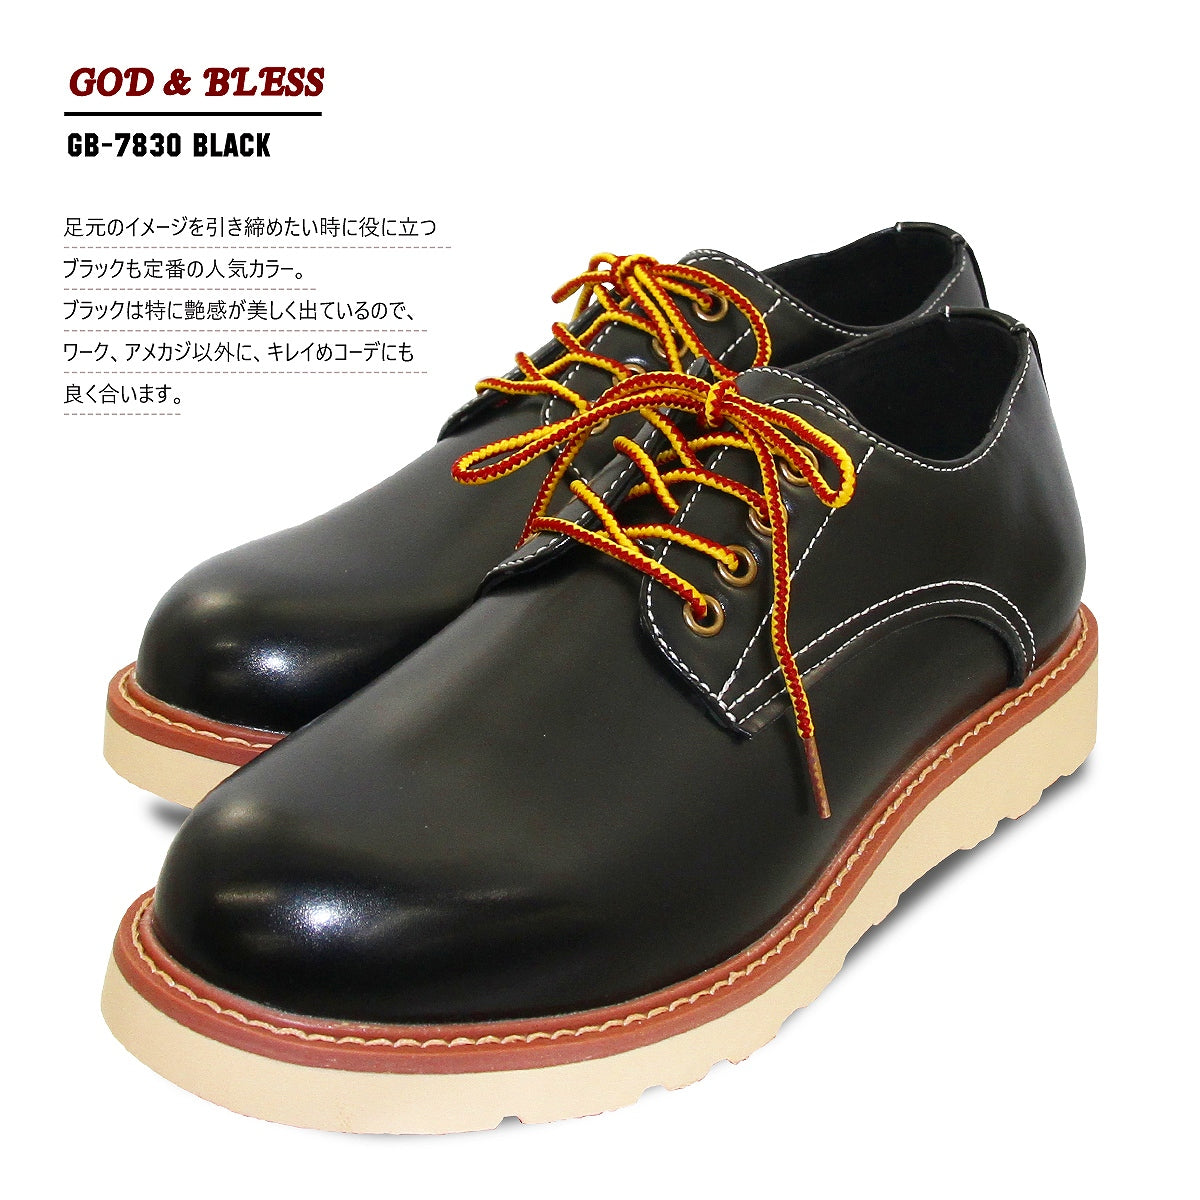 [GOD&amp;BLESS] Plain toe work boots LO cut black/red brown boots BIG size GB-7830